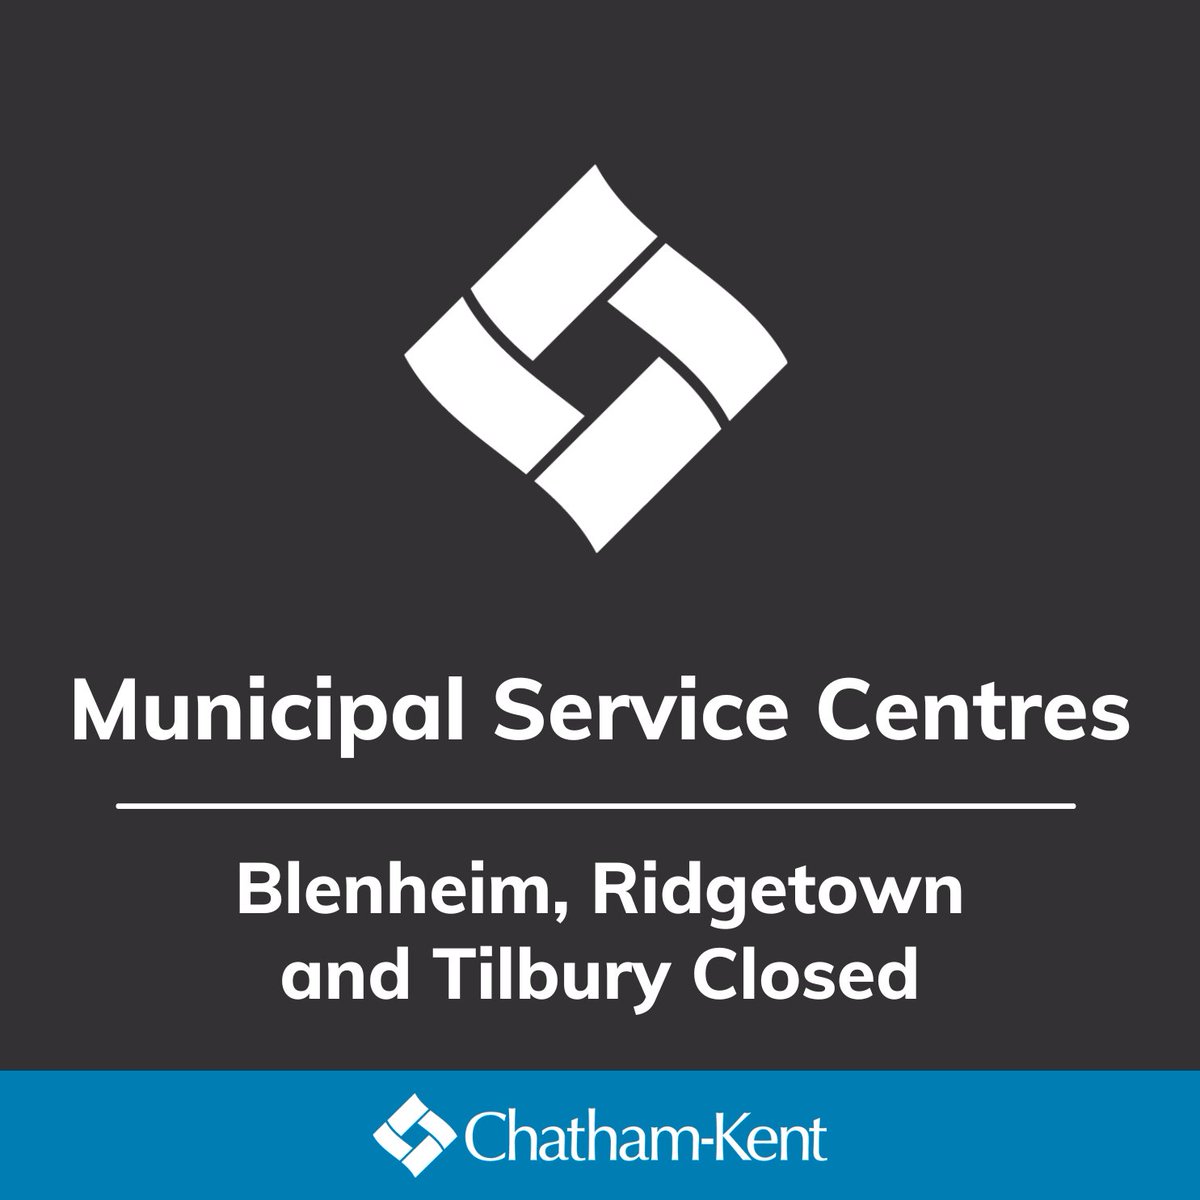 ‼️ The Blenheim, Ridgetown and Tilbury Service Centres are closed due to a power outage. Drop box payments are welcome and will be processed once power is restored. #ckont